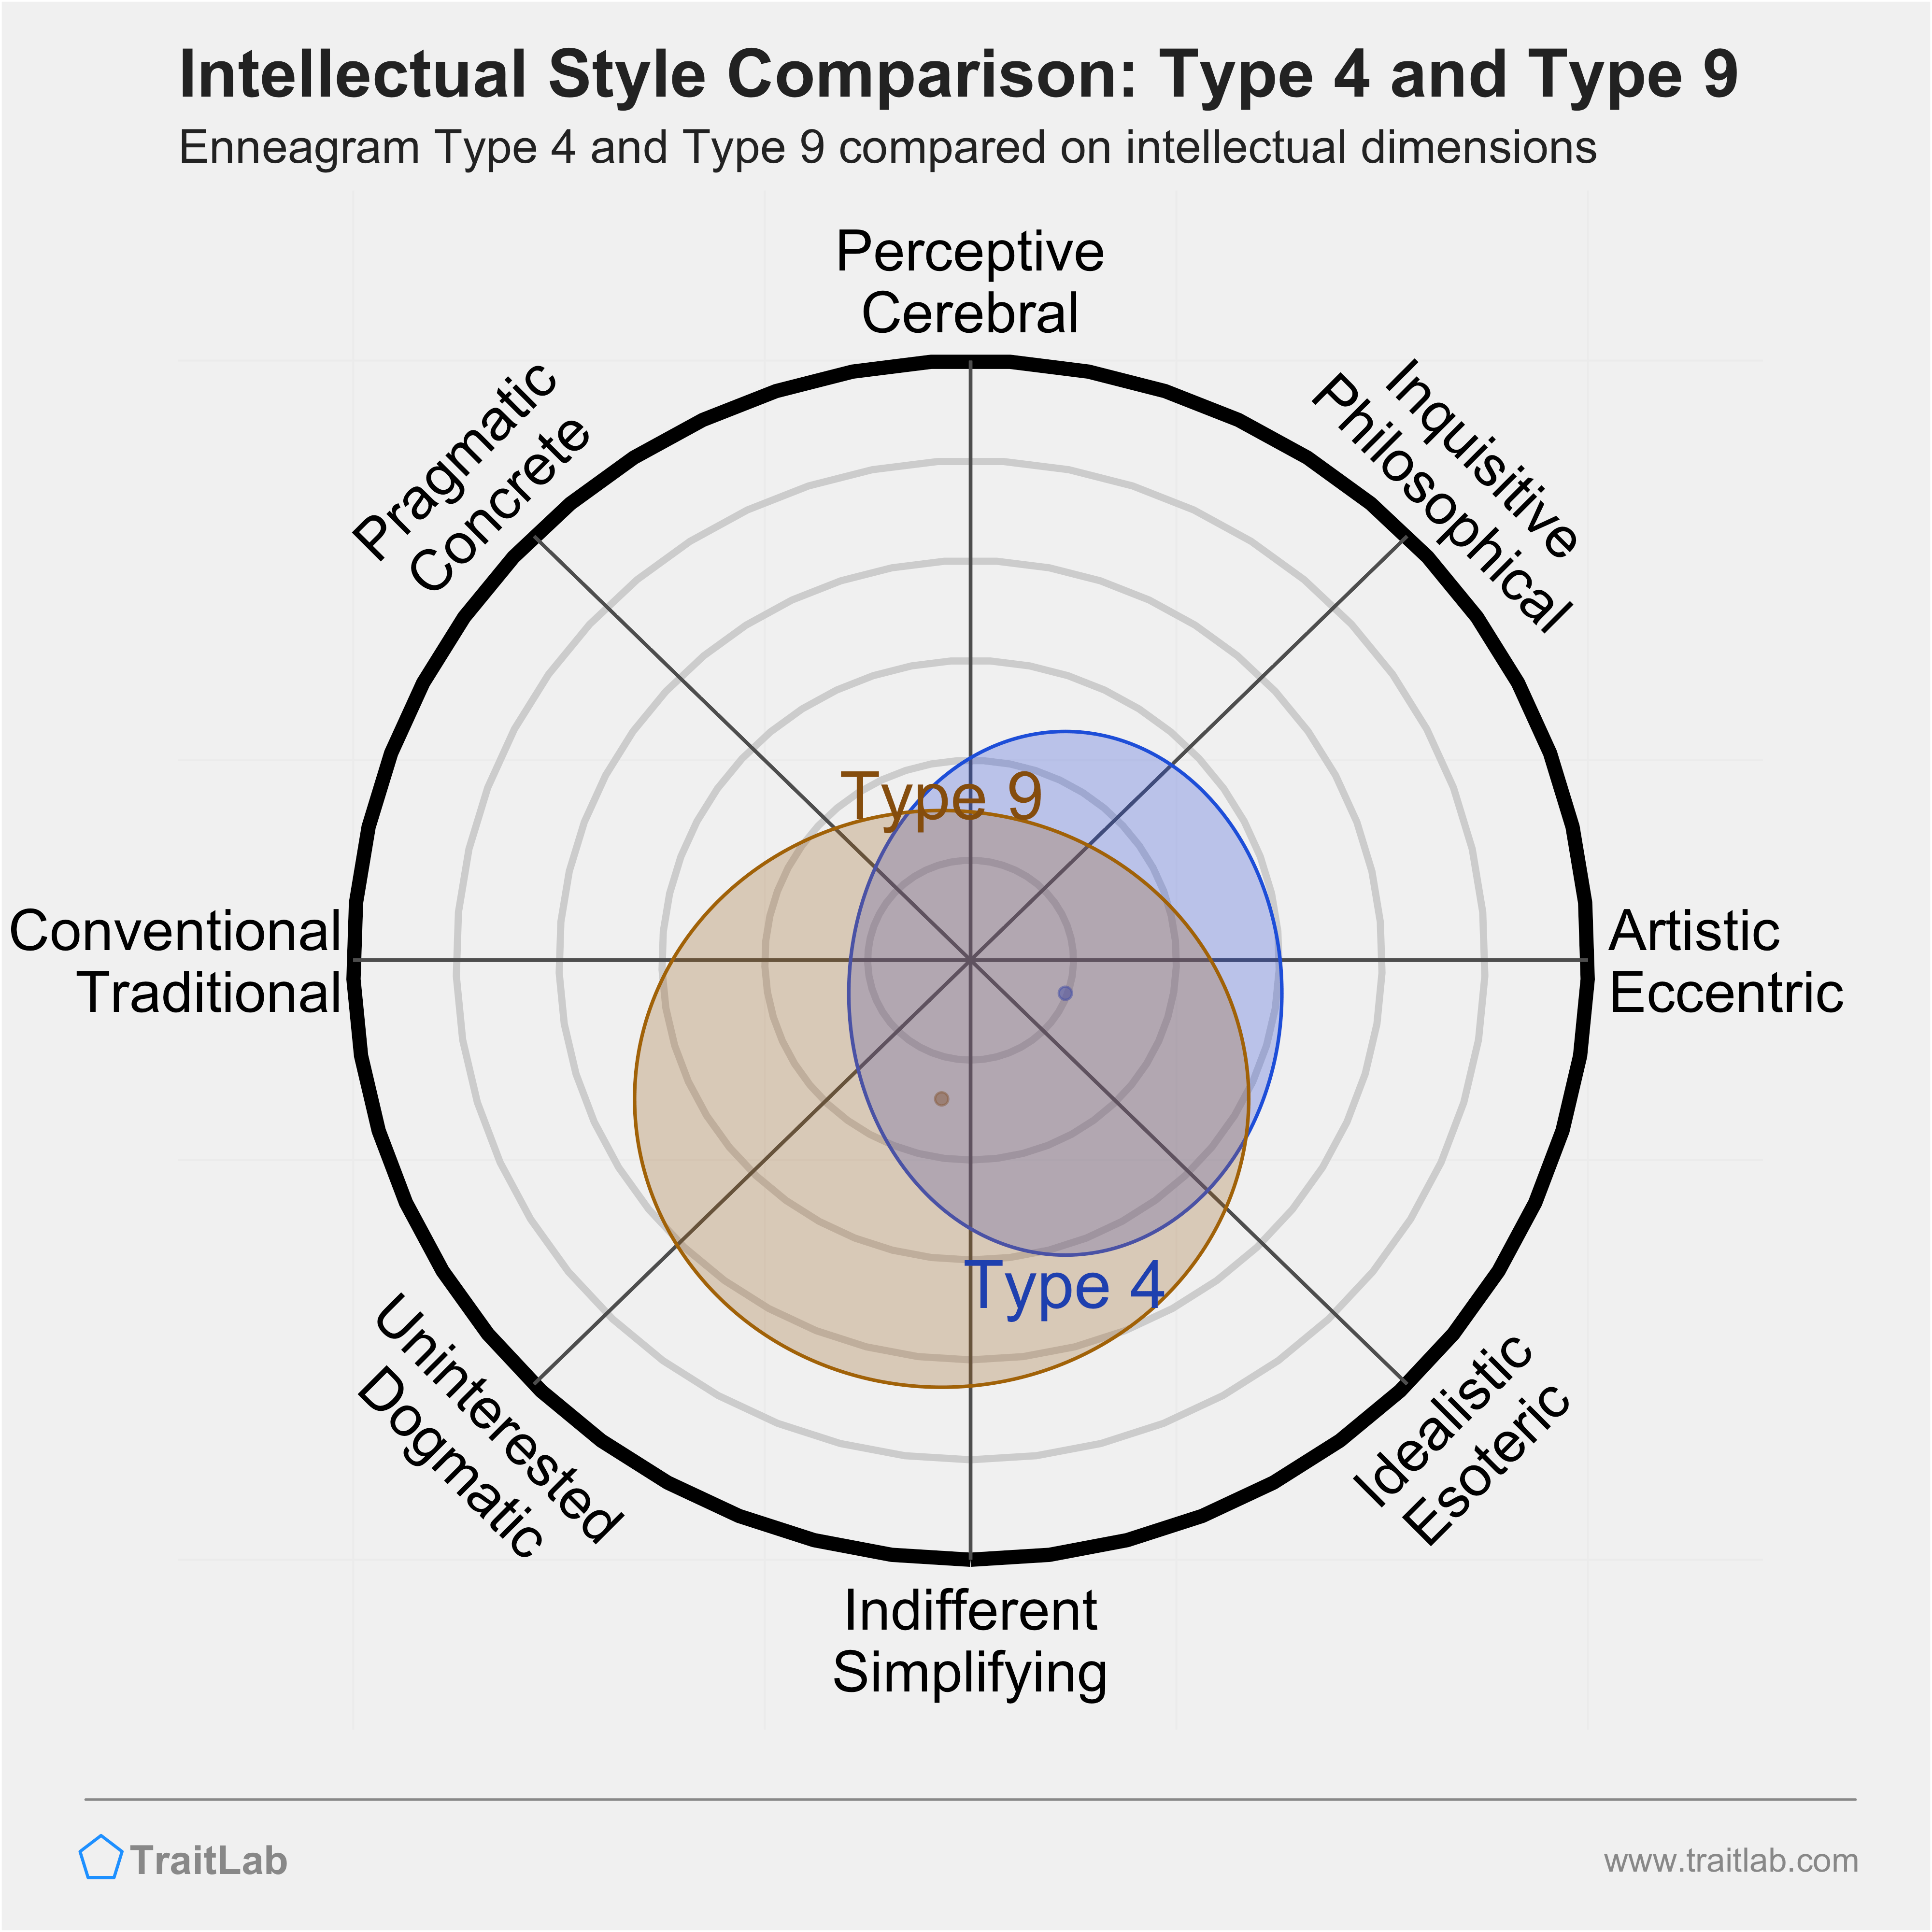 Type 4 and Type 9 comparison across intellectual dimensions